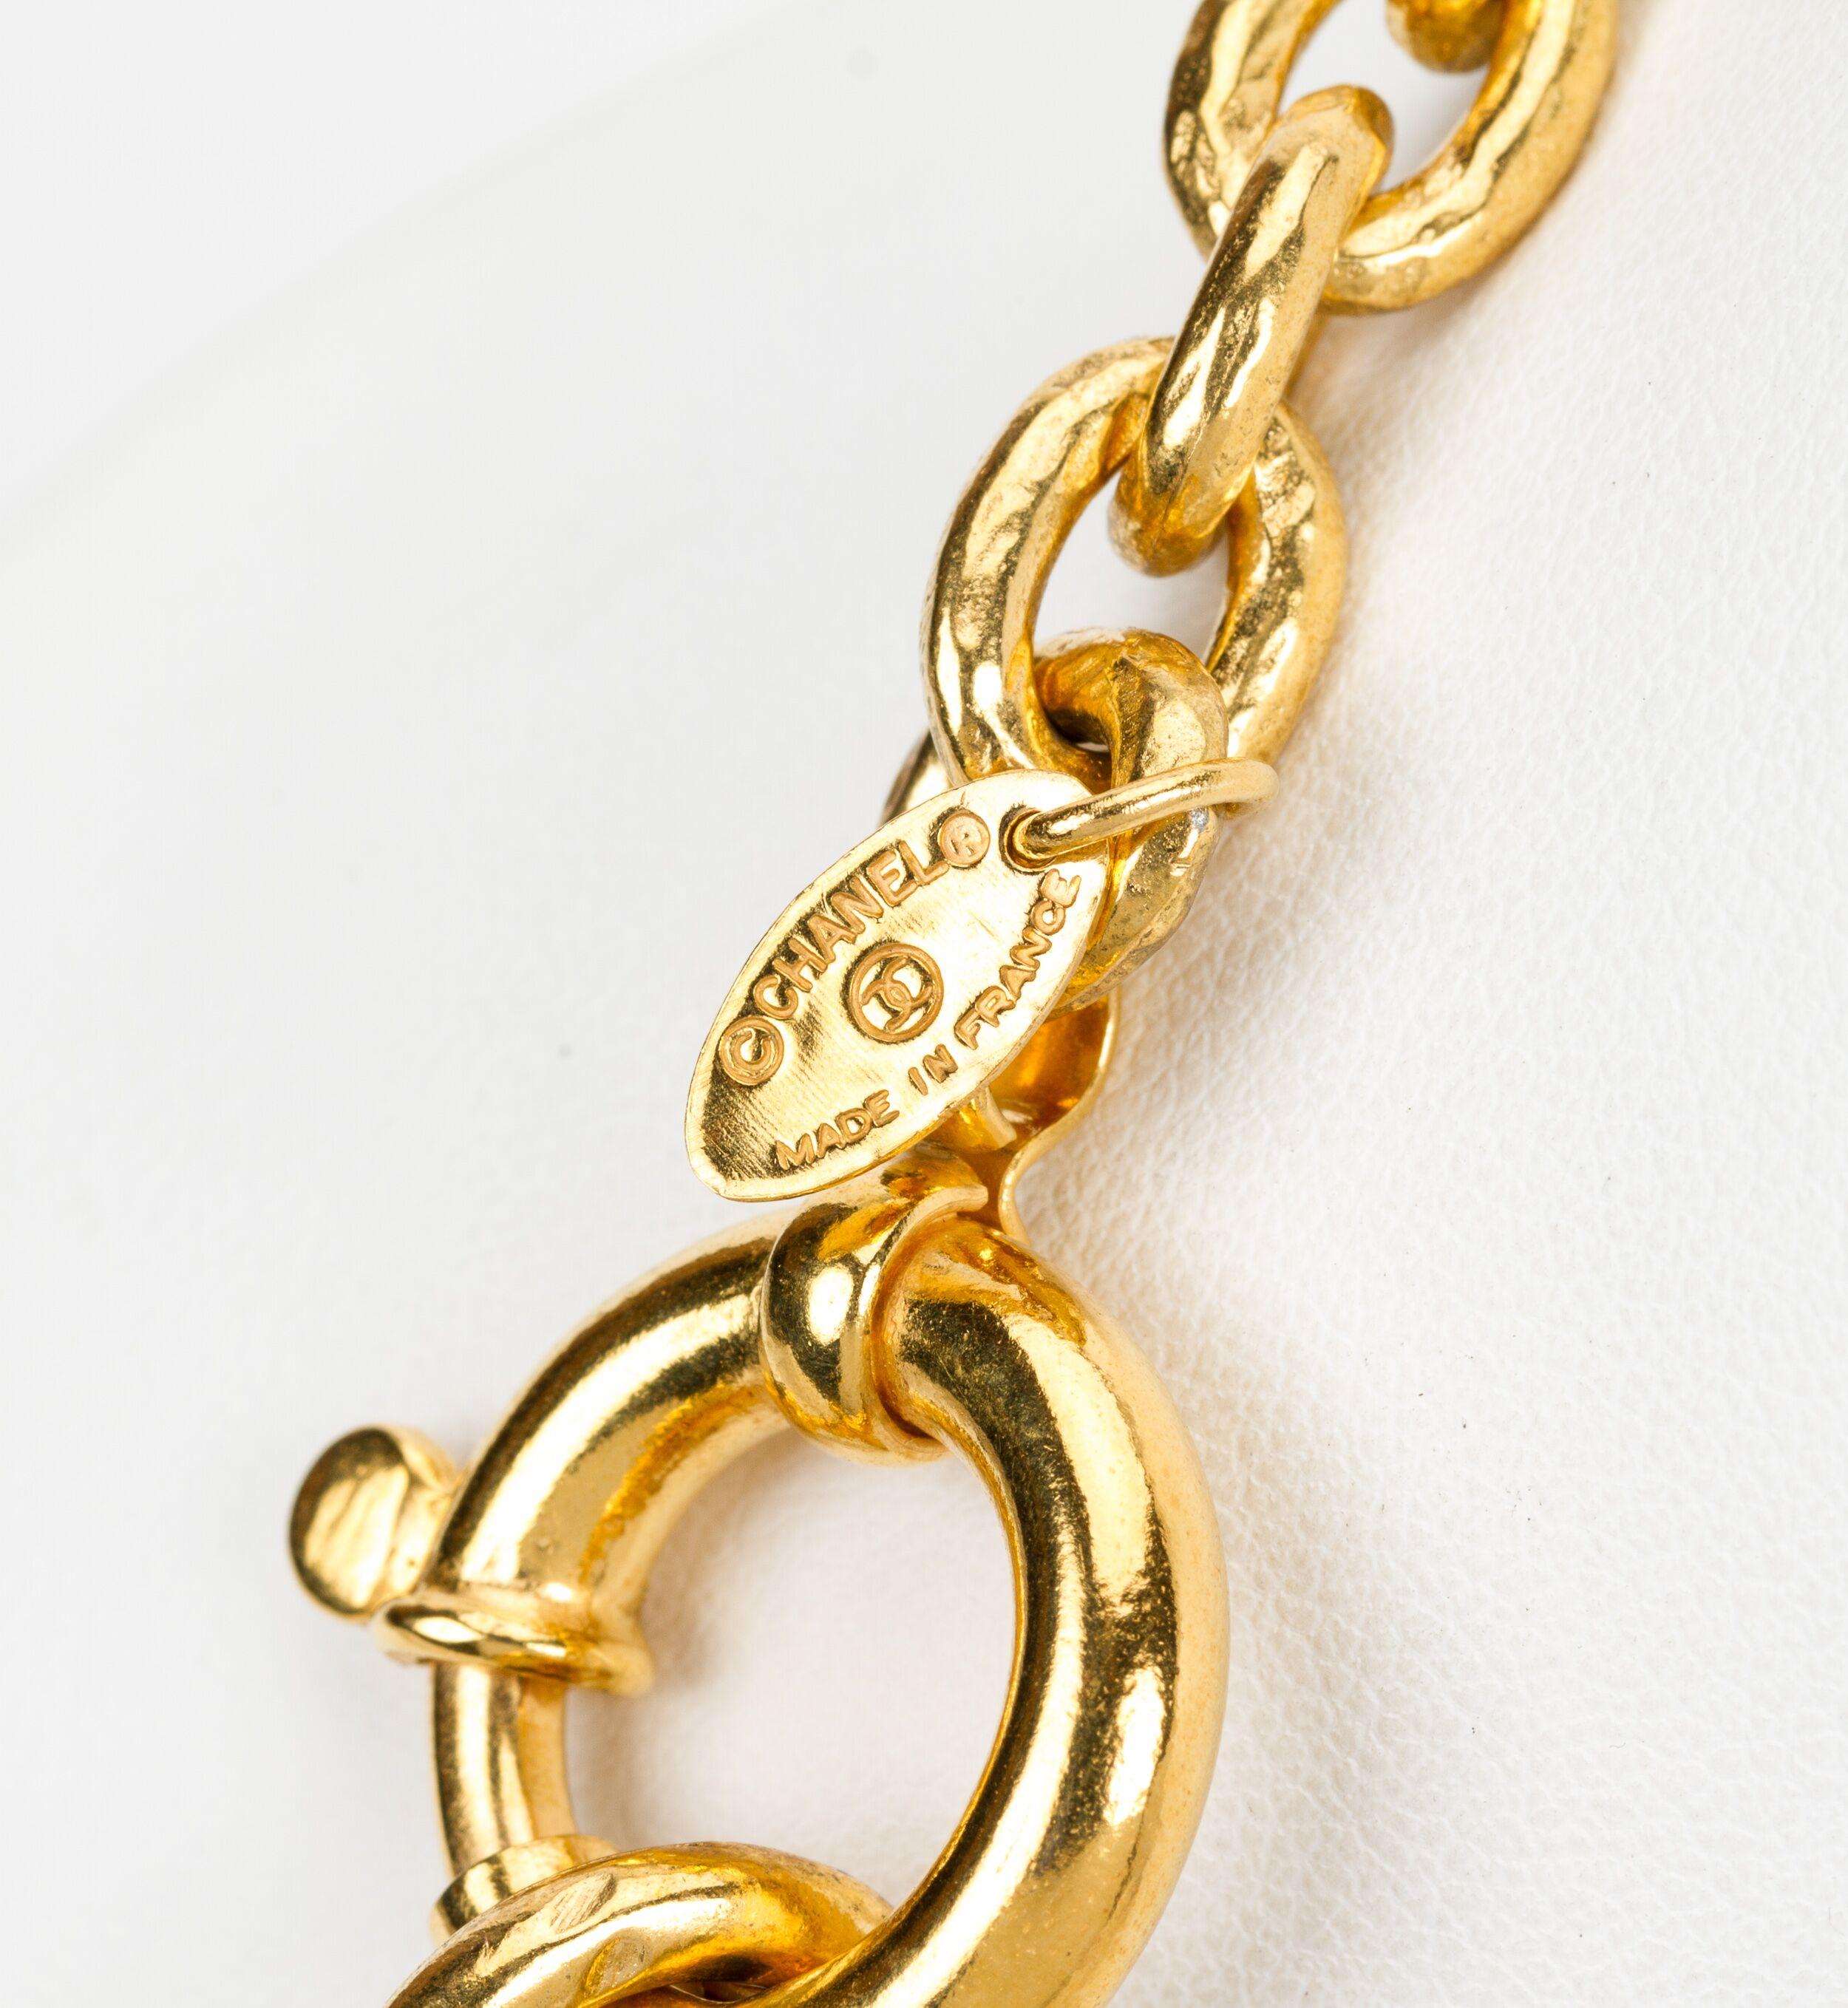 Chanel Satin Gold 80s Magnifier Necklace For Sale 4